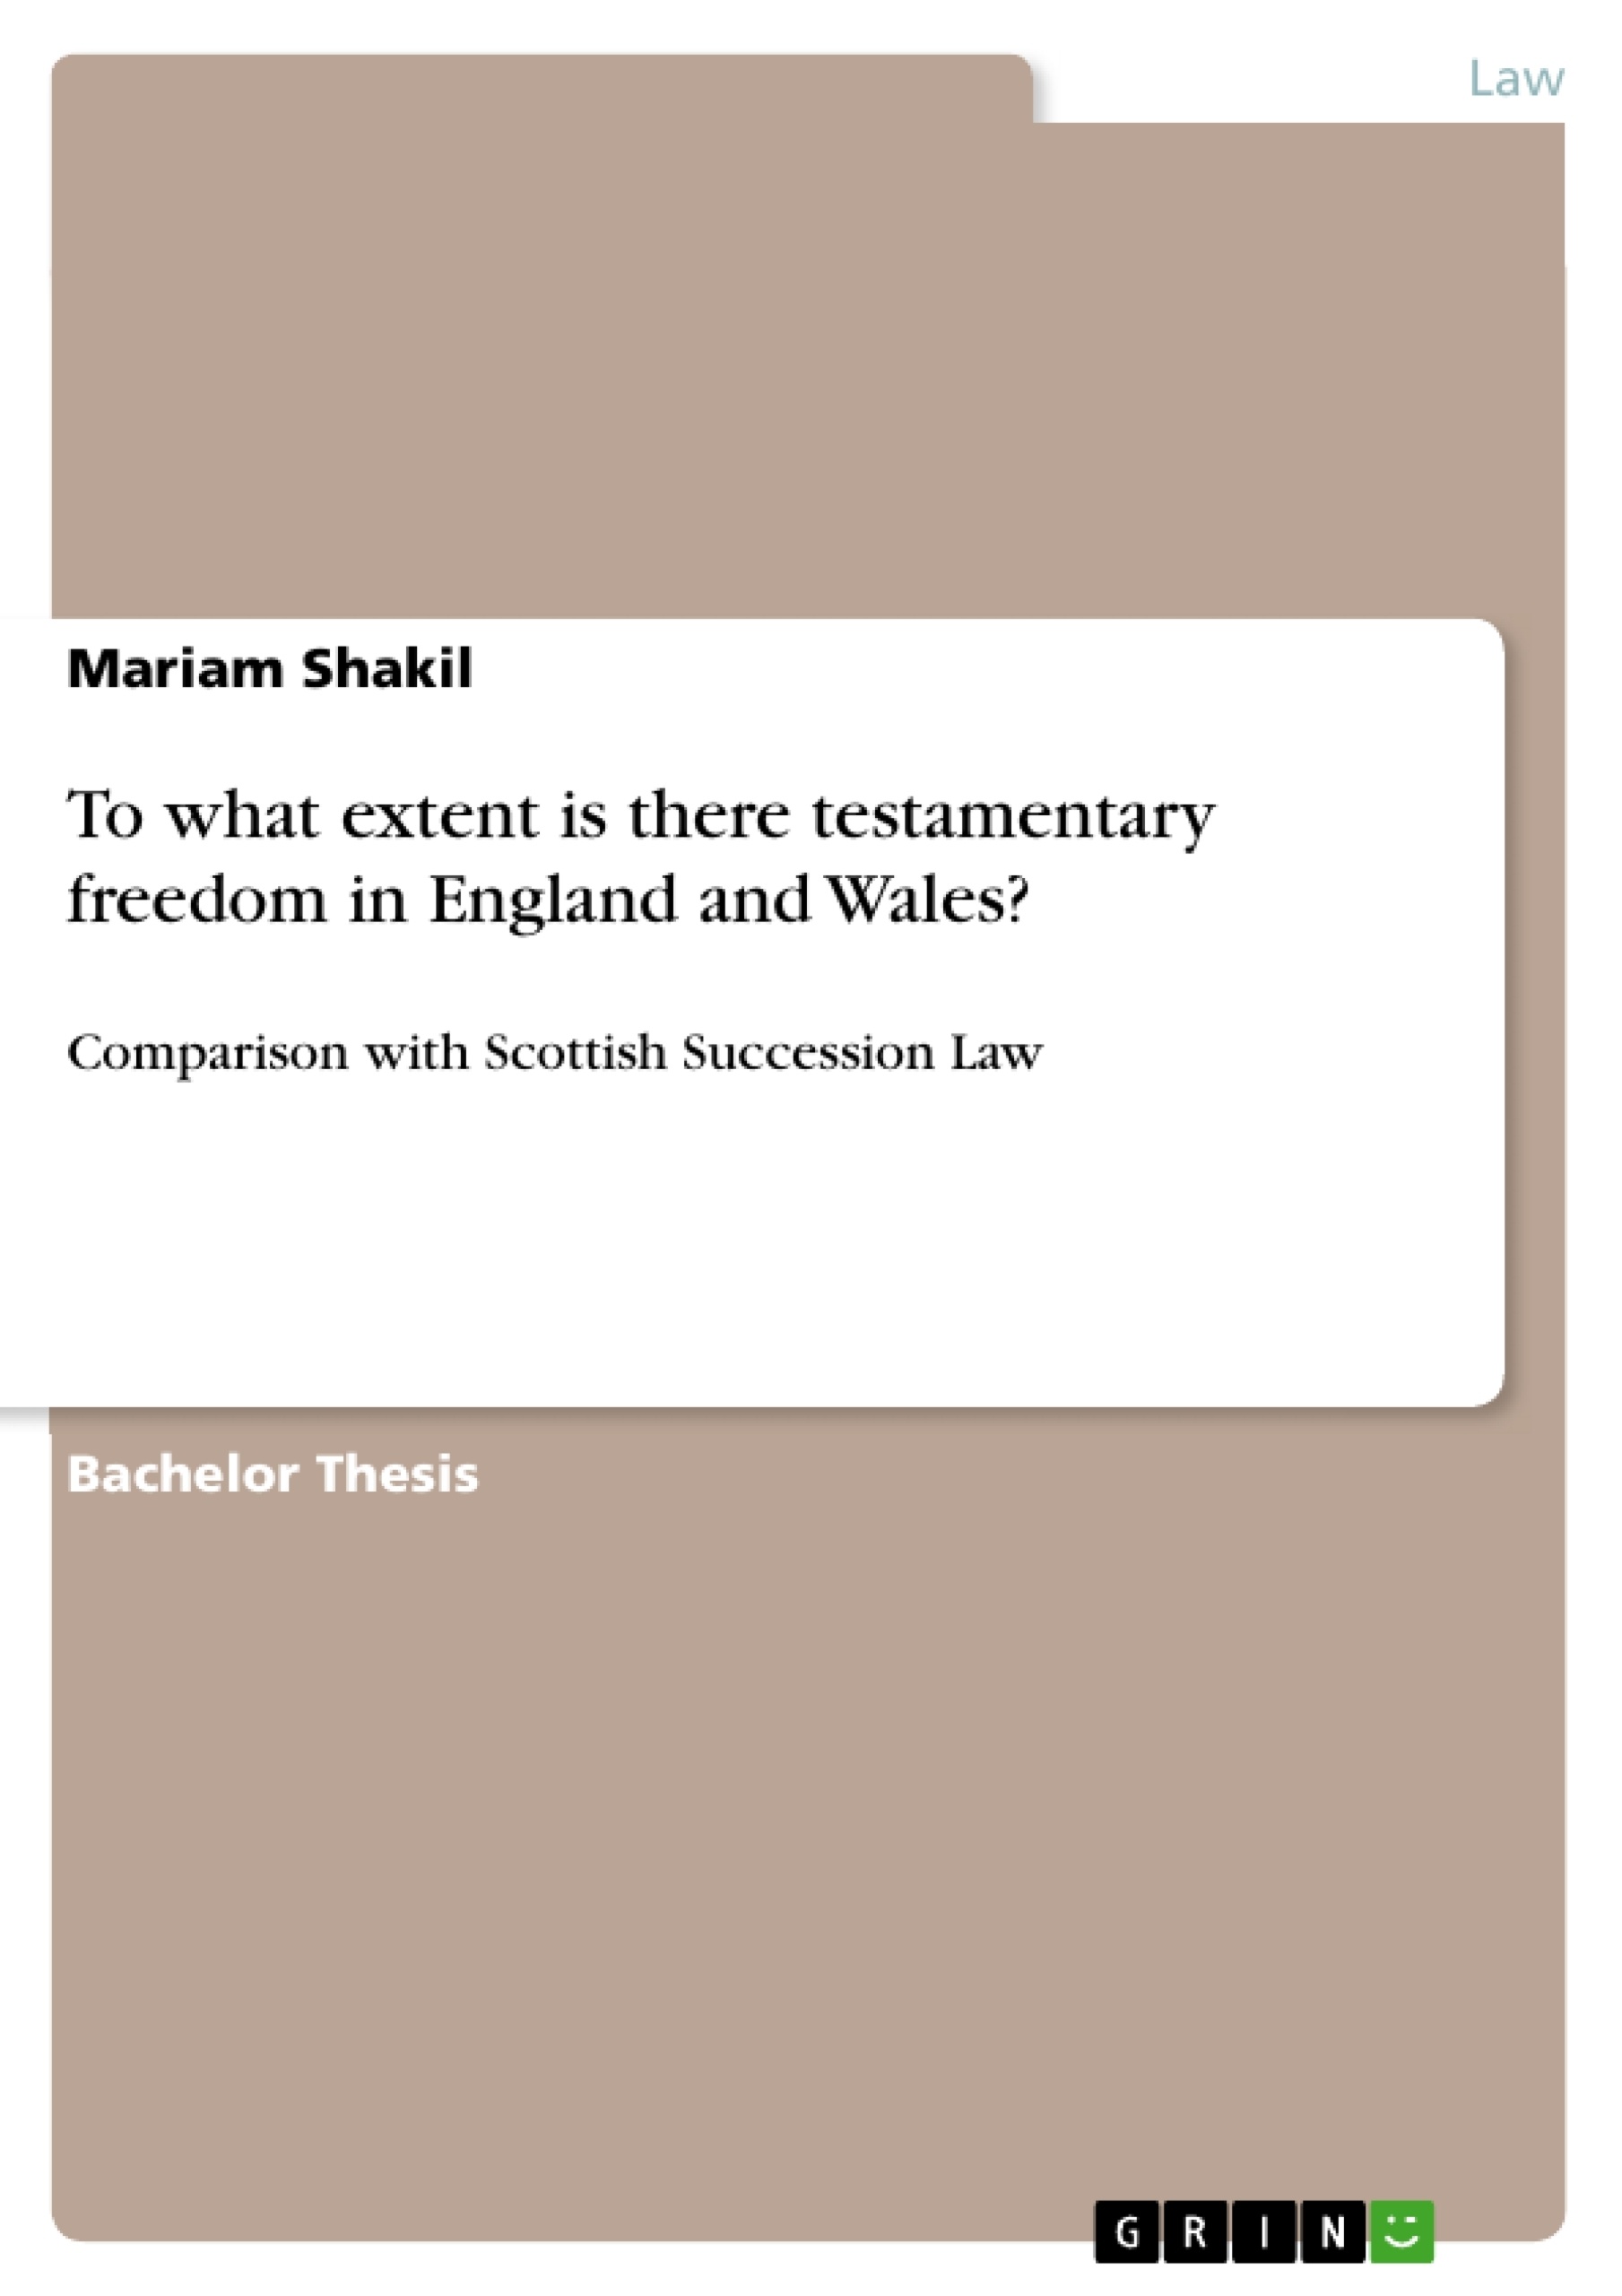 Titel: To what extent is there testamentary freedom in England and Wales?